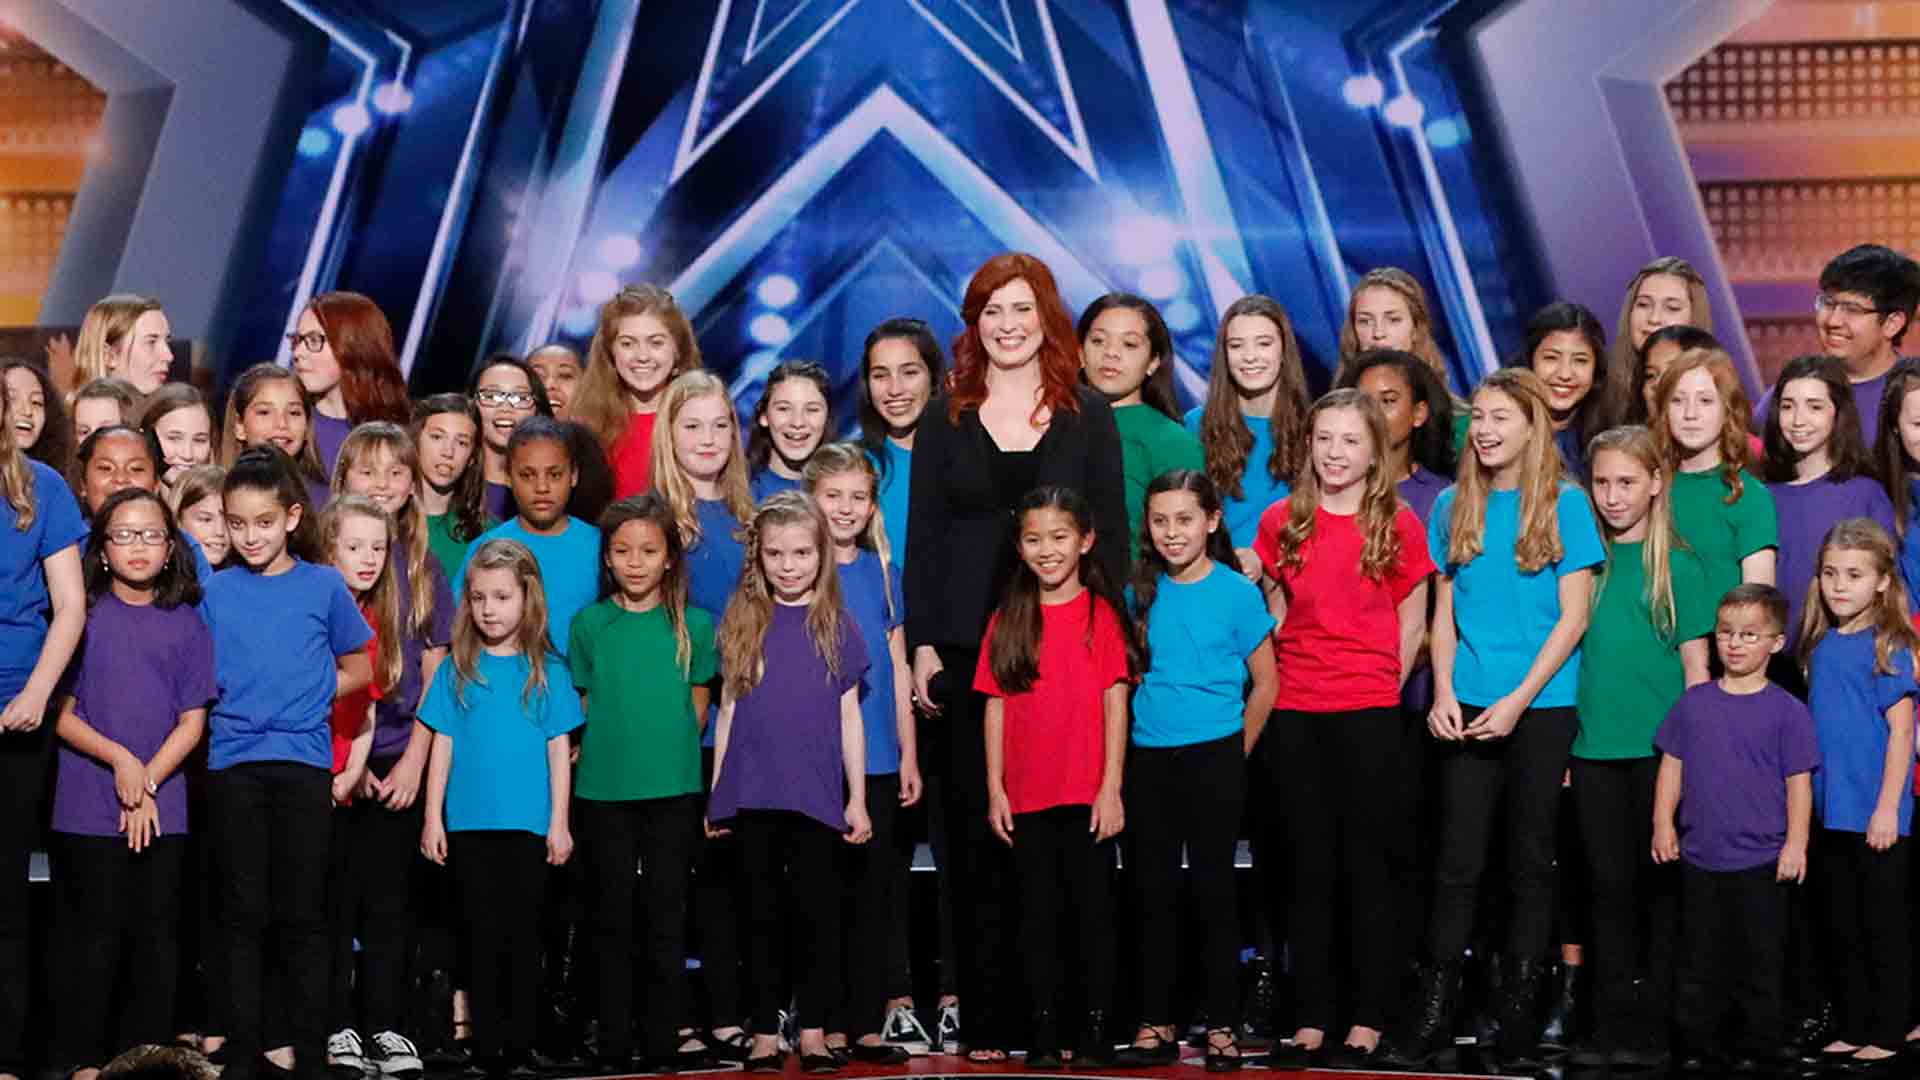 Watch America's Got Talent Highlight: Voices of Hope- Auditions - NBC.com1920 x 1080